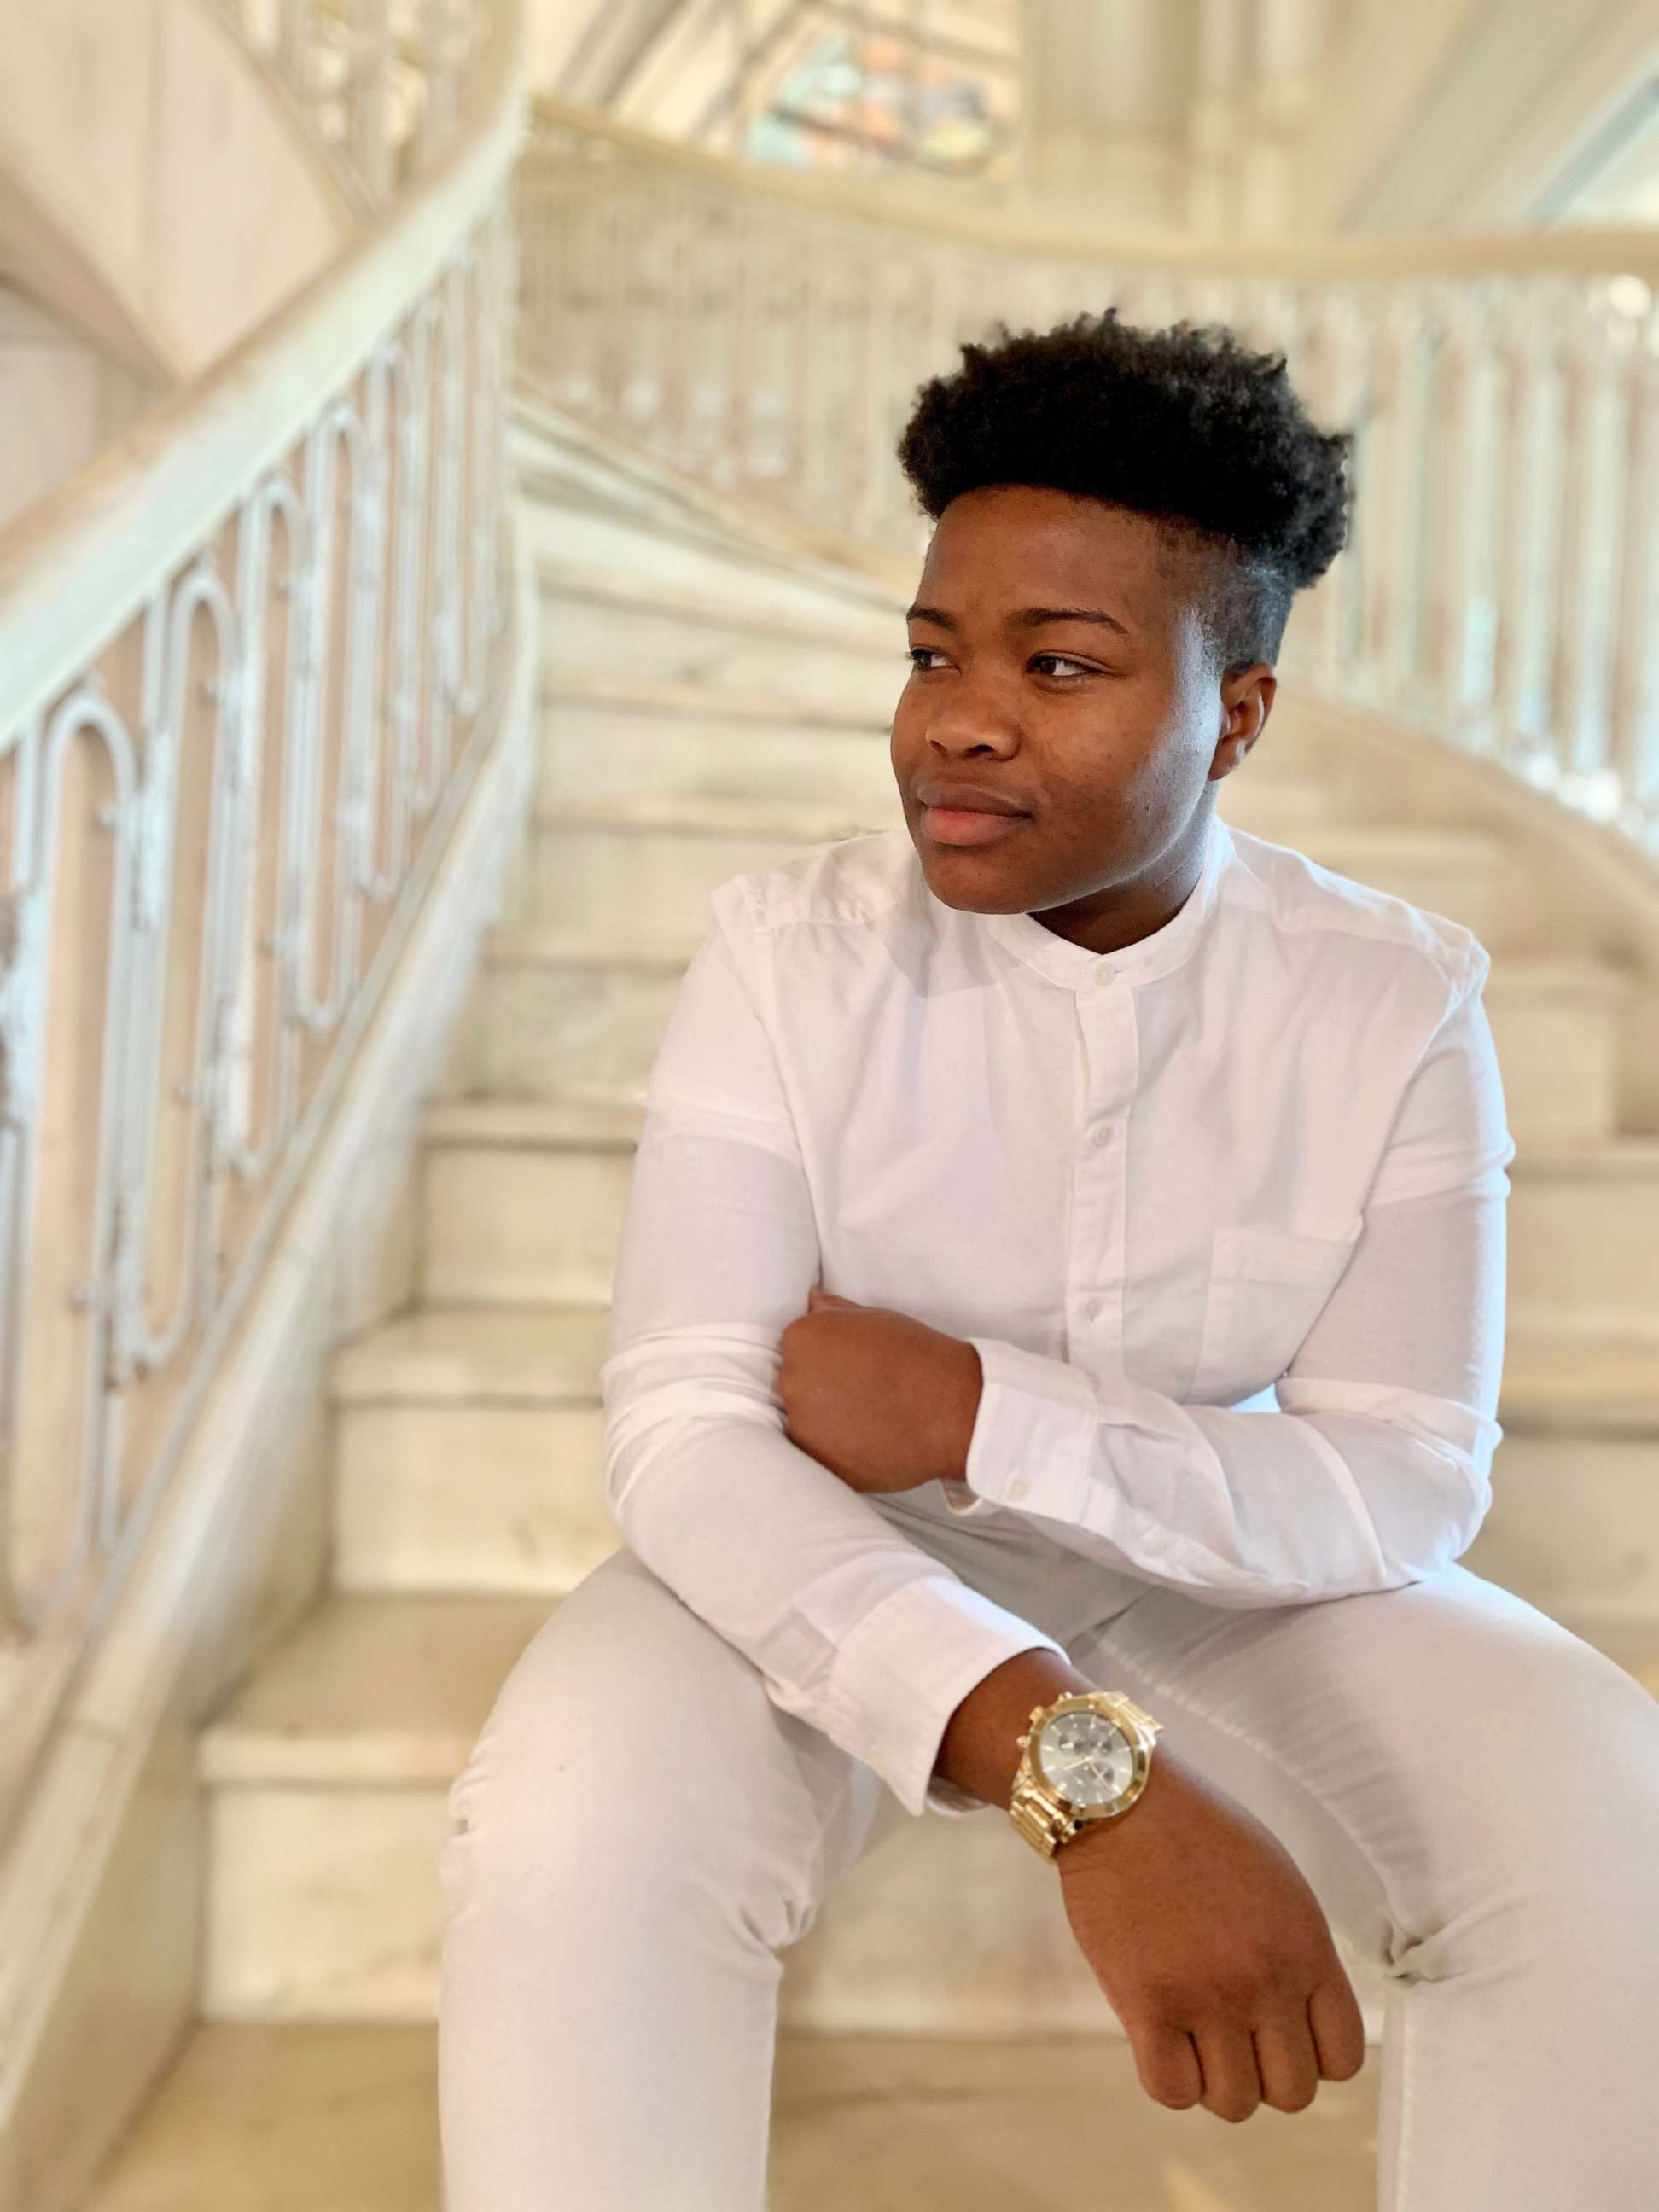 PHOTO: Tiana Barnwell, 21, is a senior at Spelman College in Atlanta and is sharing her story about overcoming adversity after spending her teenage years in New York foster care.